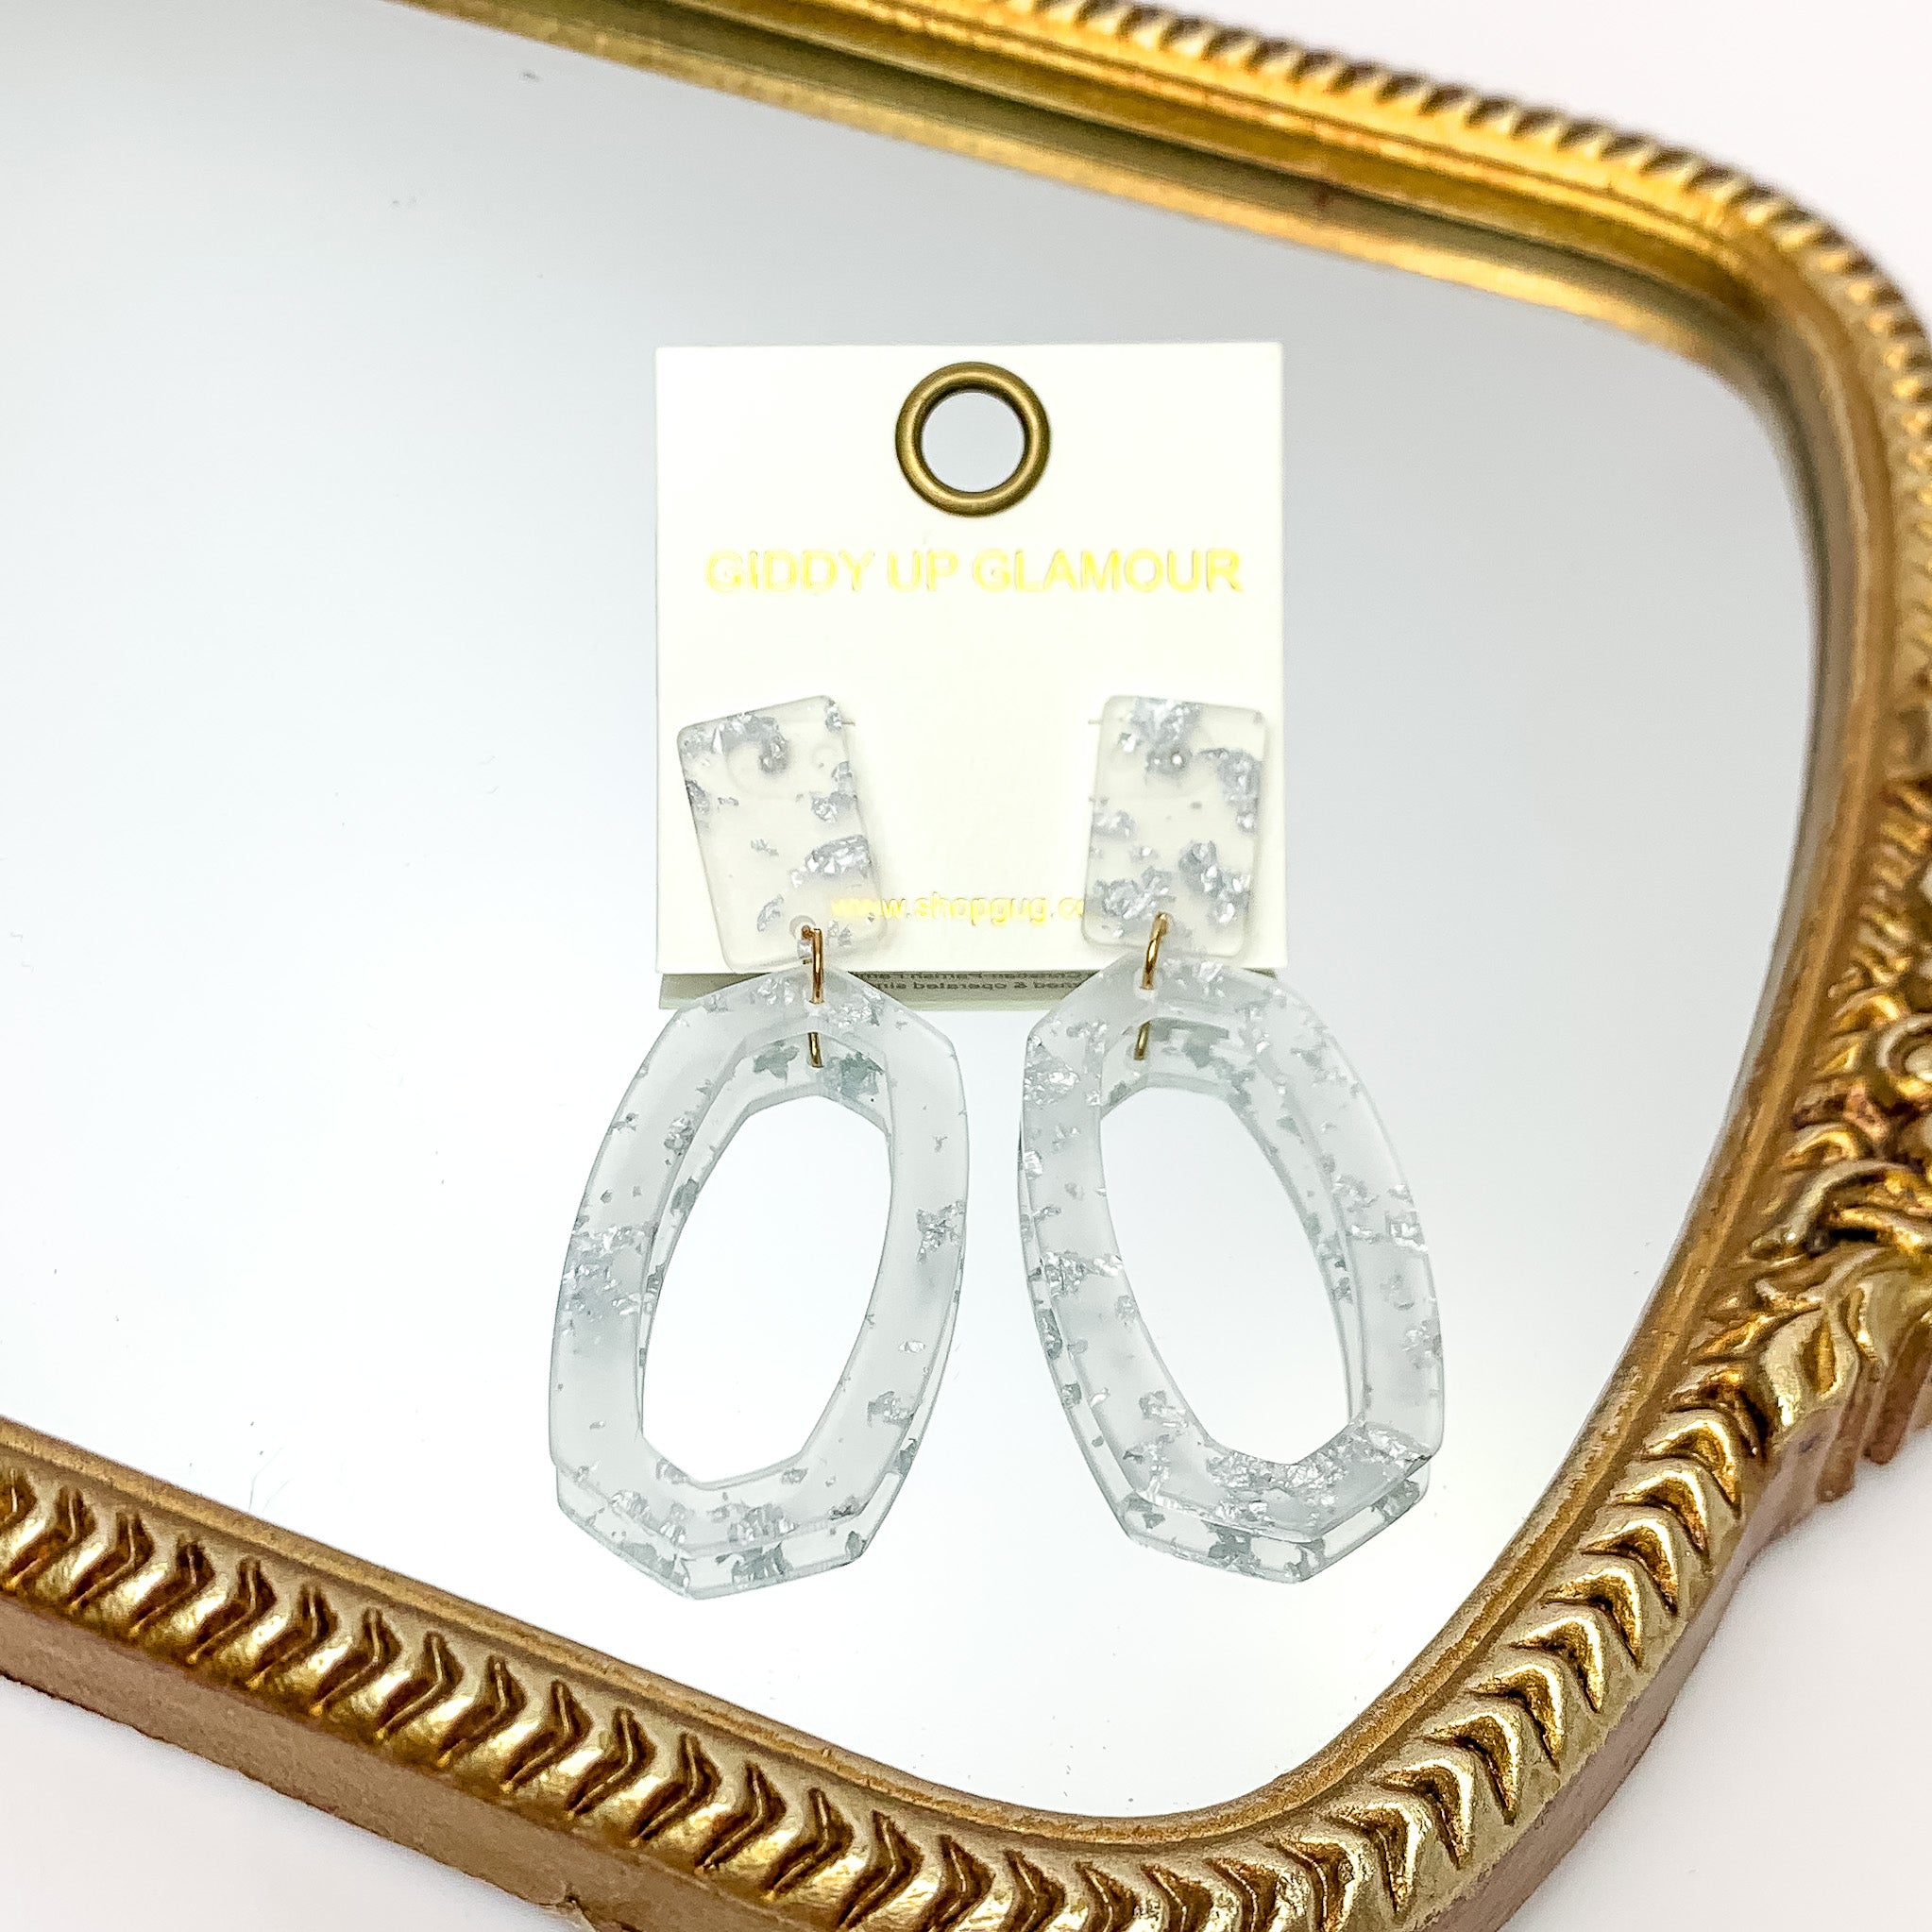 Miami Marble Open Oval Earrings in Clear and Silver. Pictured on a white background with the earrings against a gold frame.